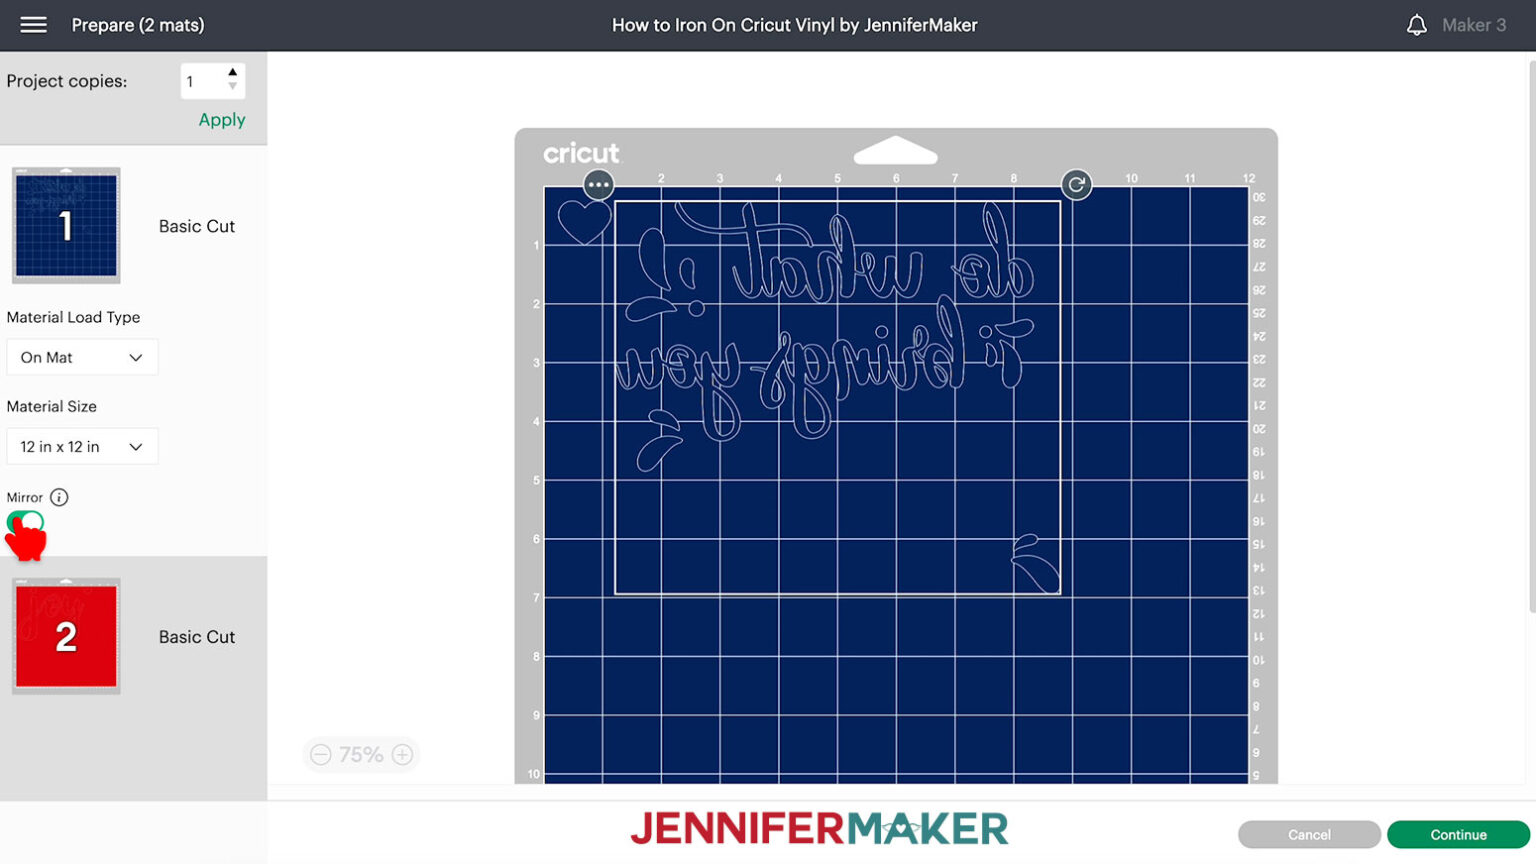 how-to-iron-on-cricut-vinyl-with-a-home-iron-jennifer-maker